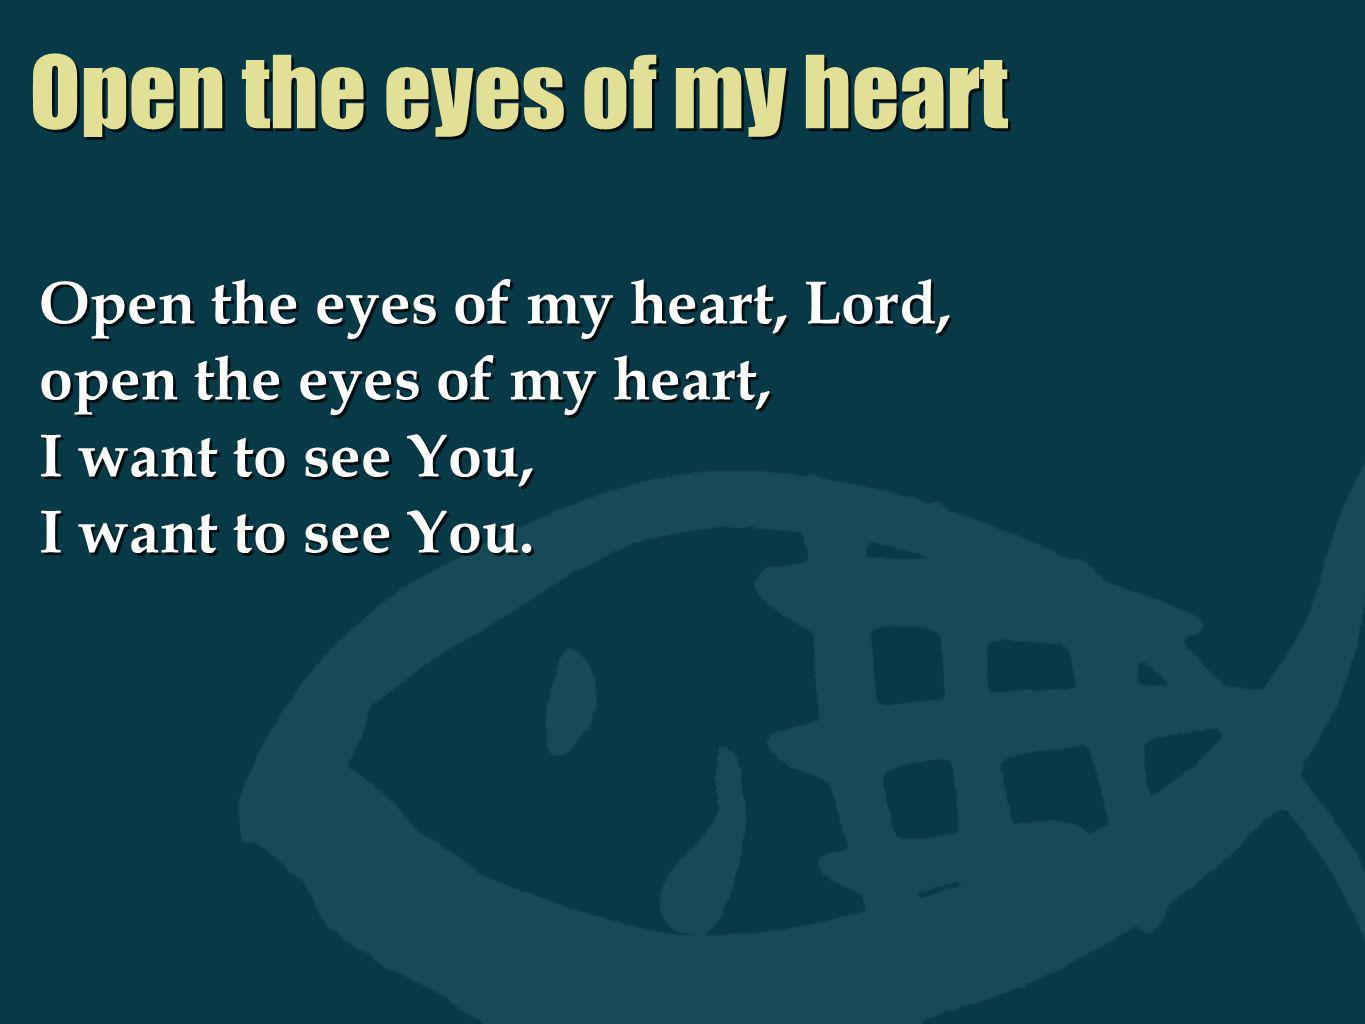 Open the eyes of my heart